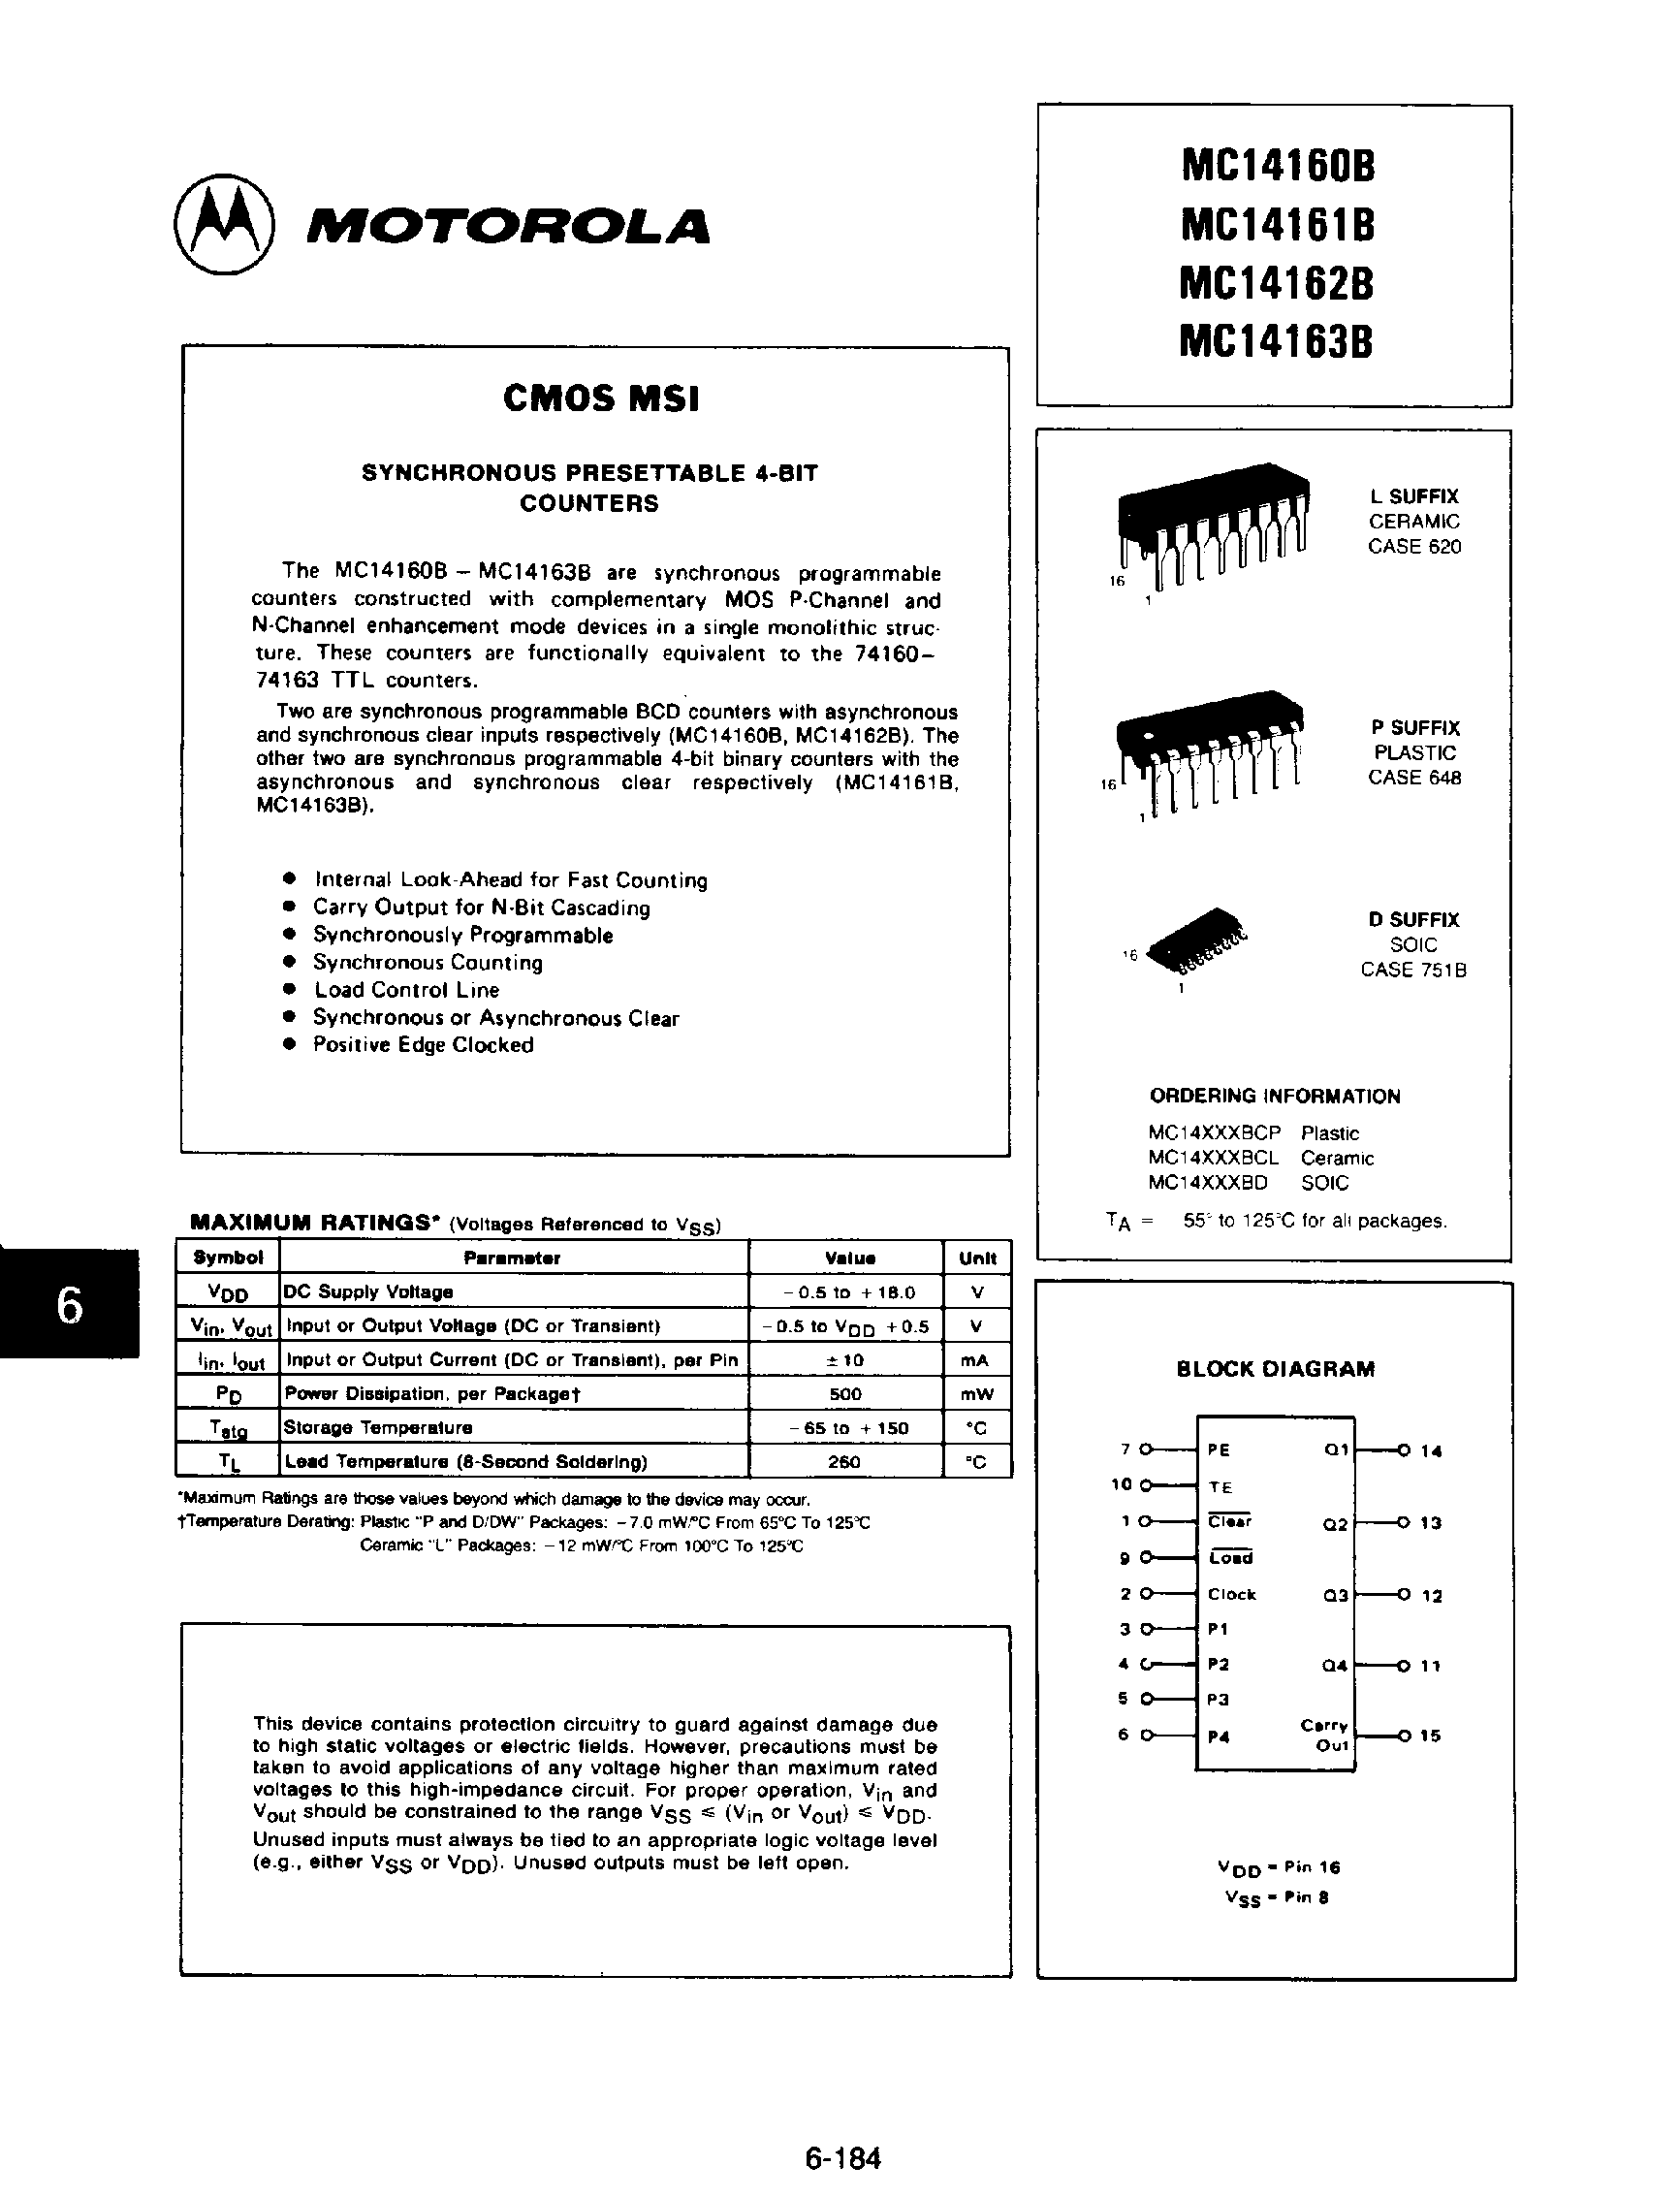 Datasheet MC14161B - Synchronous Presettable 4-Bit Counters page 1